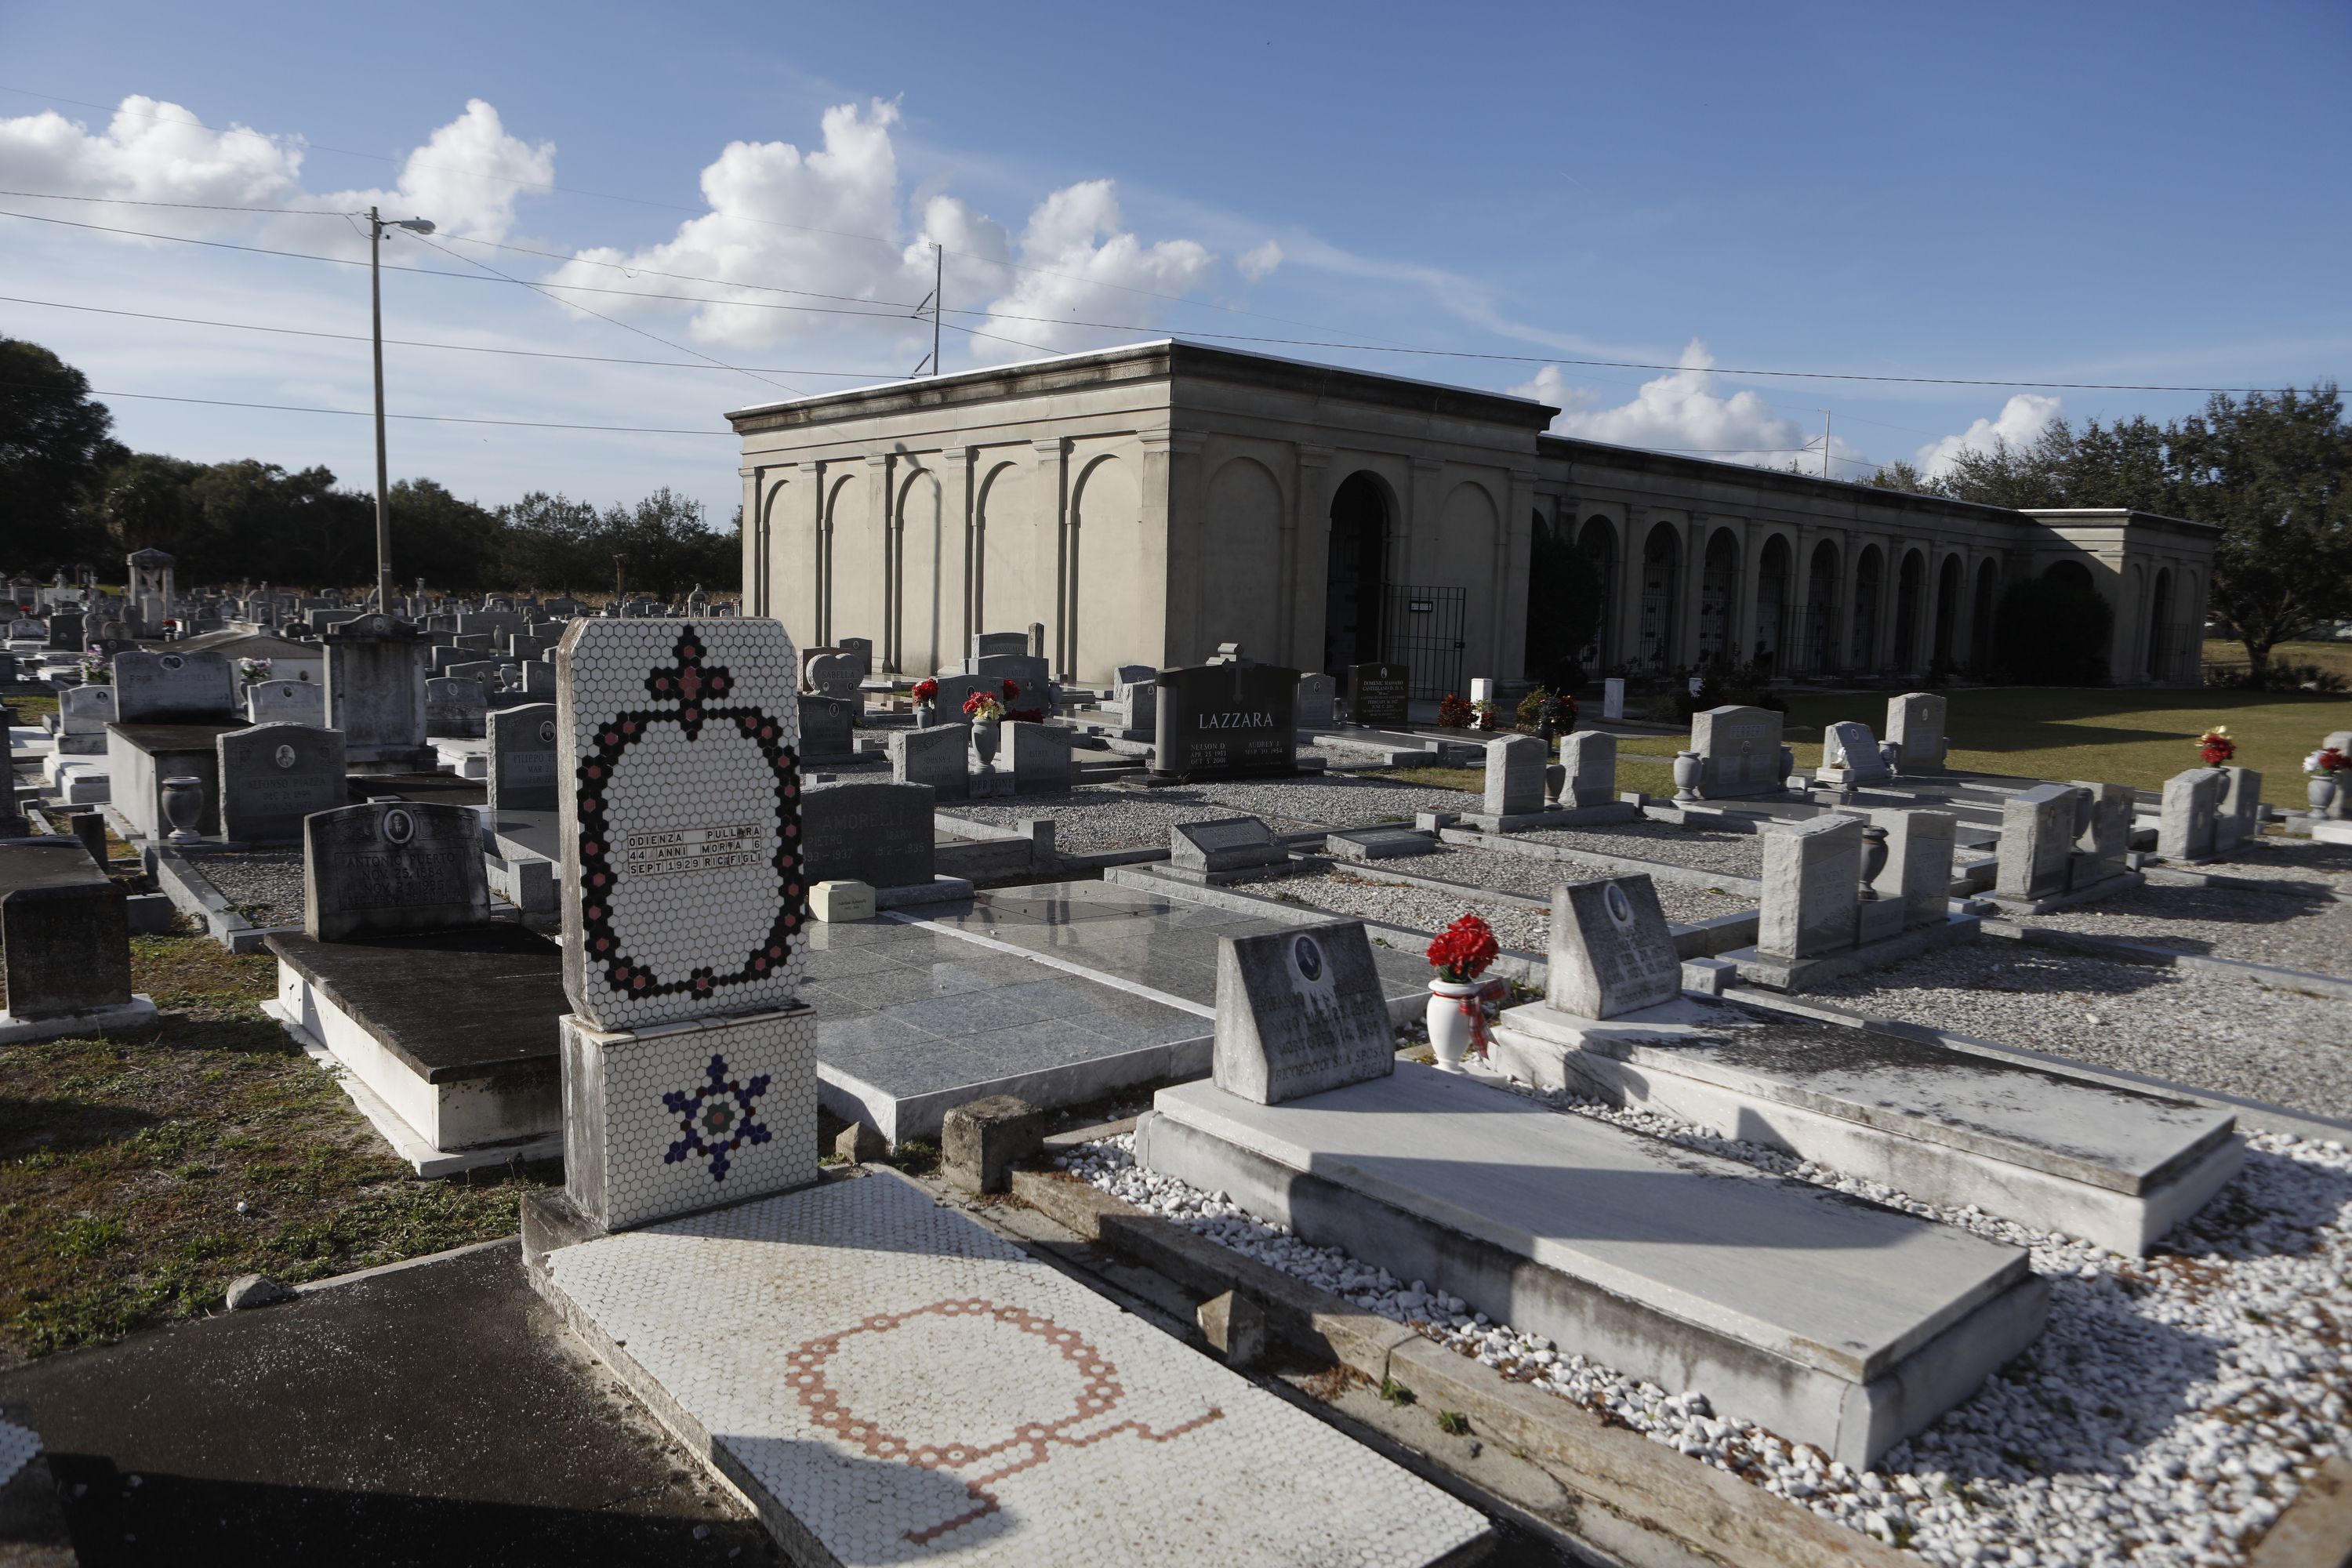 Borders appear to have changed over the years around the L’Unione Italiana Cemetery and Centro Espanol Cemetery in East Tampa. Photo: Octavio Jones/Axios